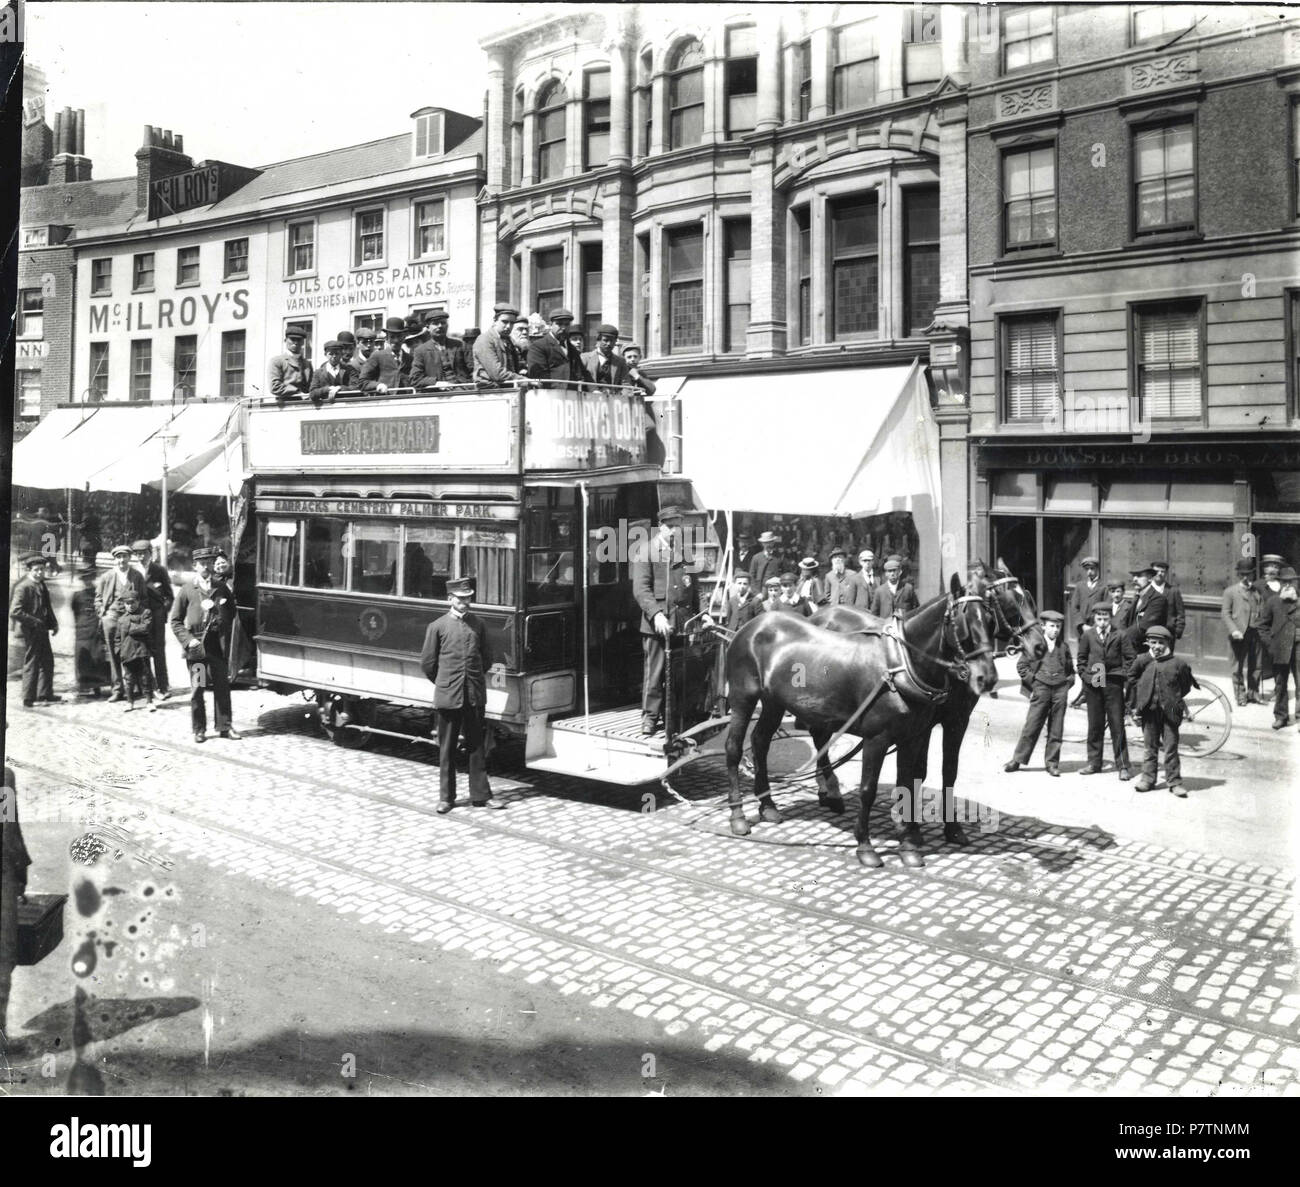 English: Reading Tramways Company. Horse-tram No. 4 in Broad Street, c. 1900, heading eastwards on the 'Barracks - Cemetery - Palmer Park' route. The driver, conductor and inspector pose for the camera. The saloon is almost empty, but the upper deck is thronged, and there are several spectators in the picture. Recognisable shops in the background: No. 50 (William McIlroy, boot and shoe warehouse); No. 49 (William Archer oils, colours, paints and varnishes); Nos. 47 amd 48 (A. H. Bull, gentlemen's and boys' outfitters); No. 46 (Dowsett Brothers, brewers). 1900-1909 : photograph by Walton Adams. Stock Photo